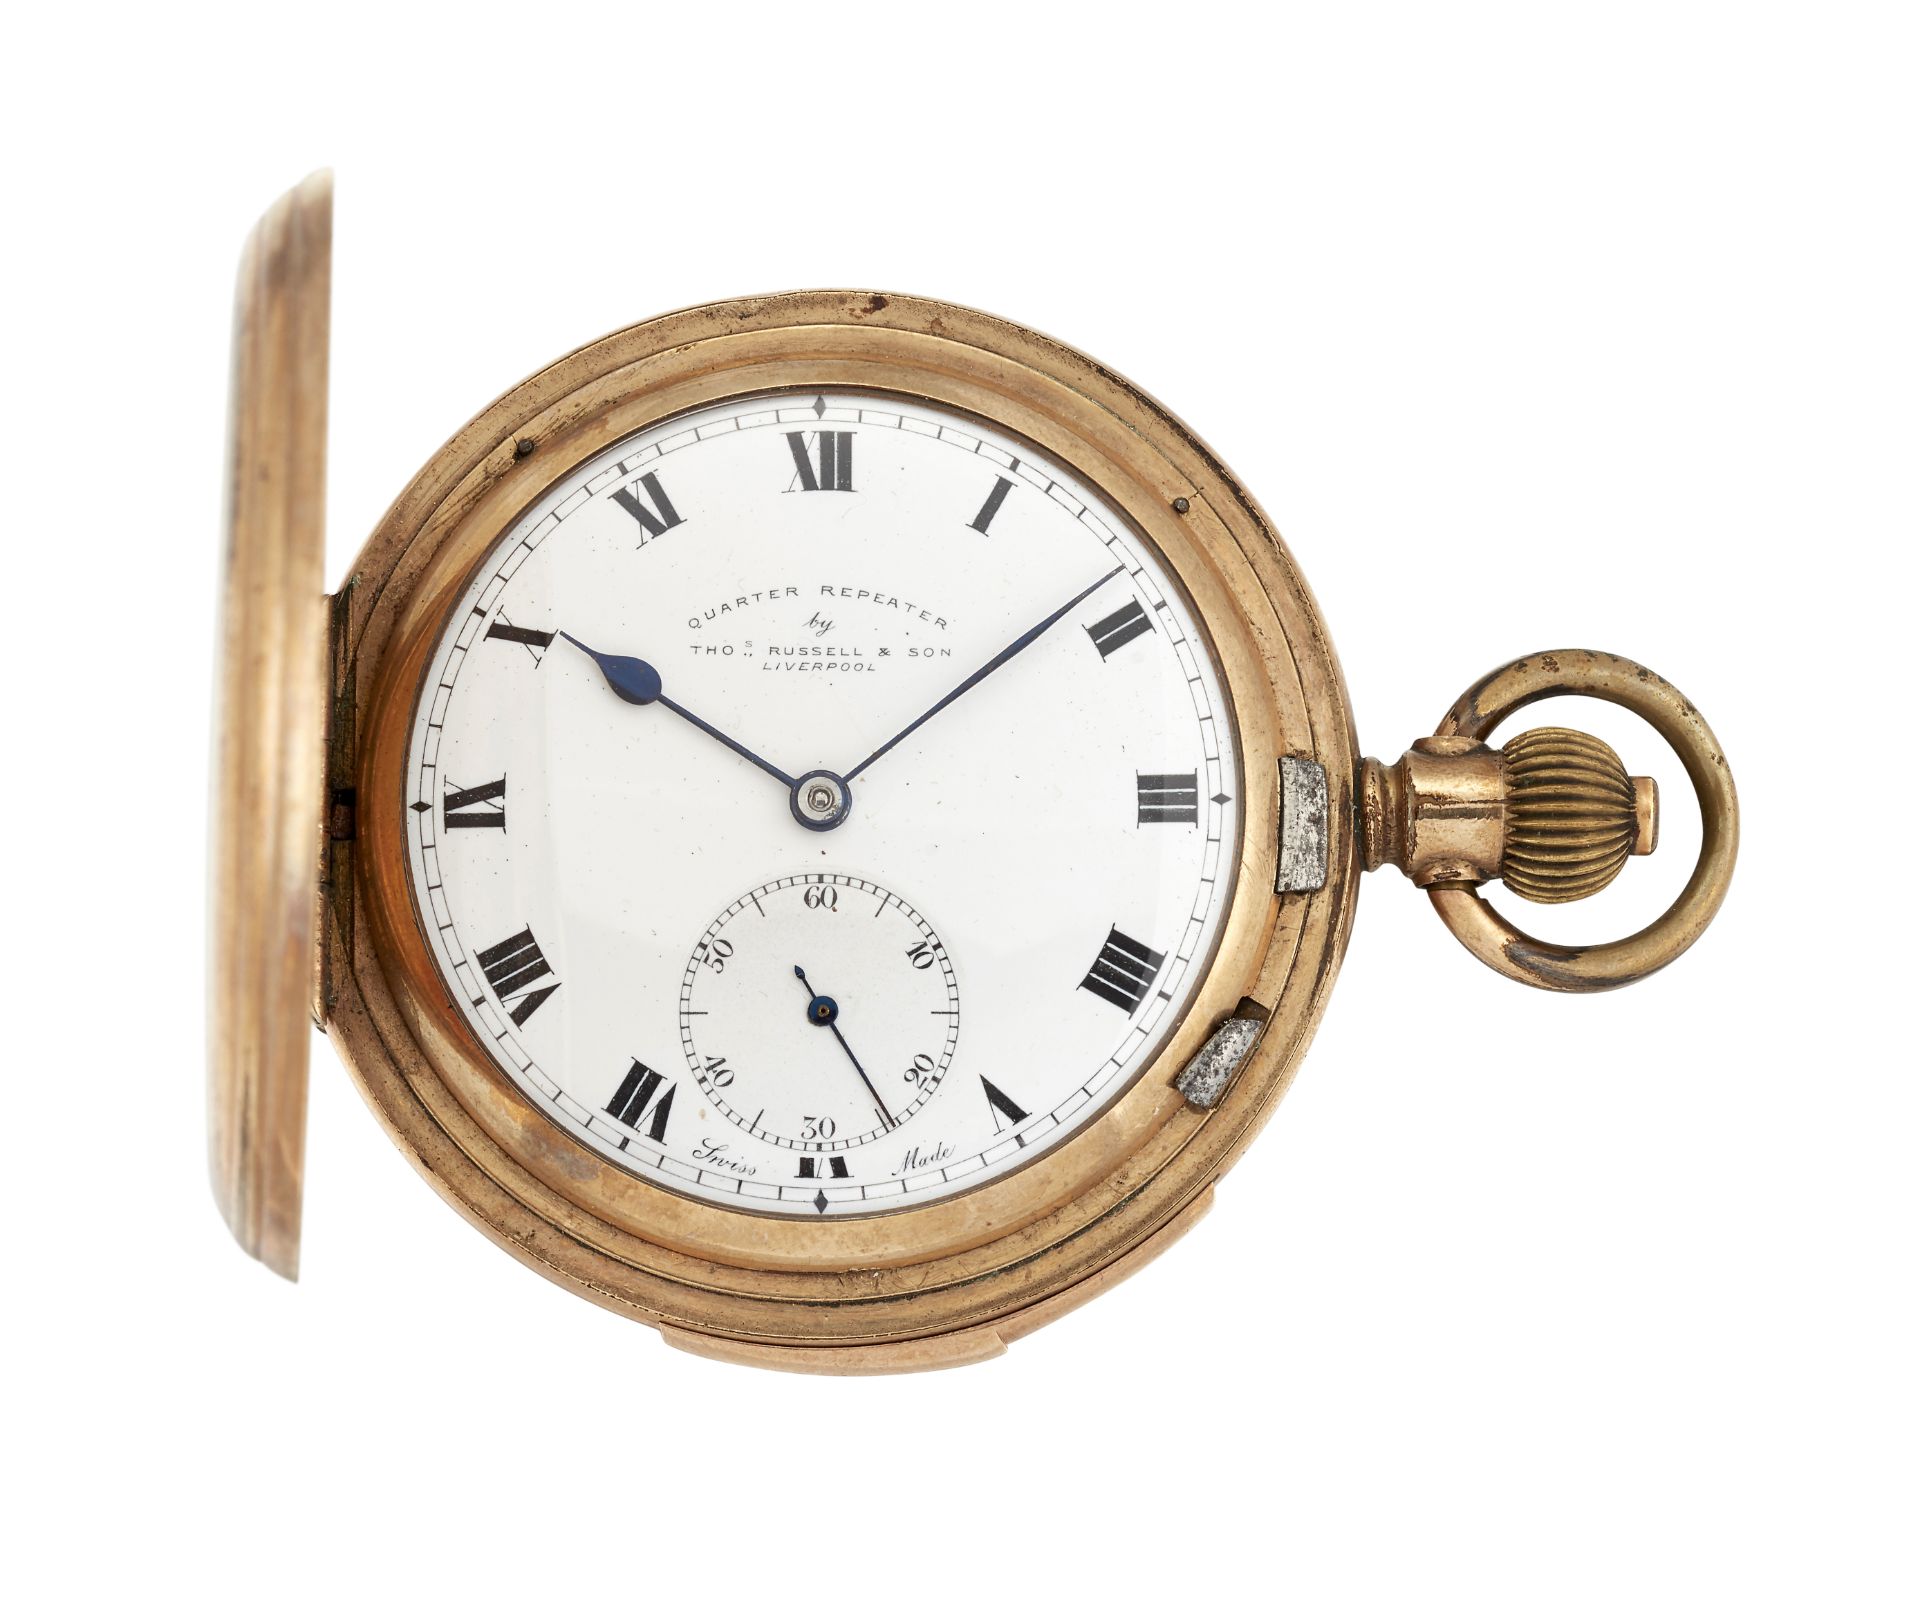 A Thomas Russell Quarter Repeater Hunter Pocket watch